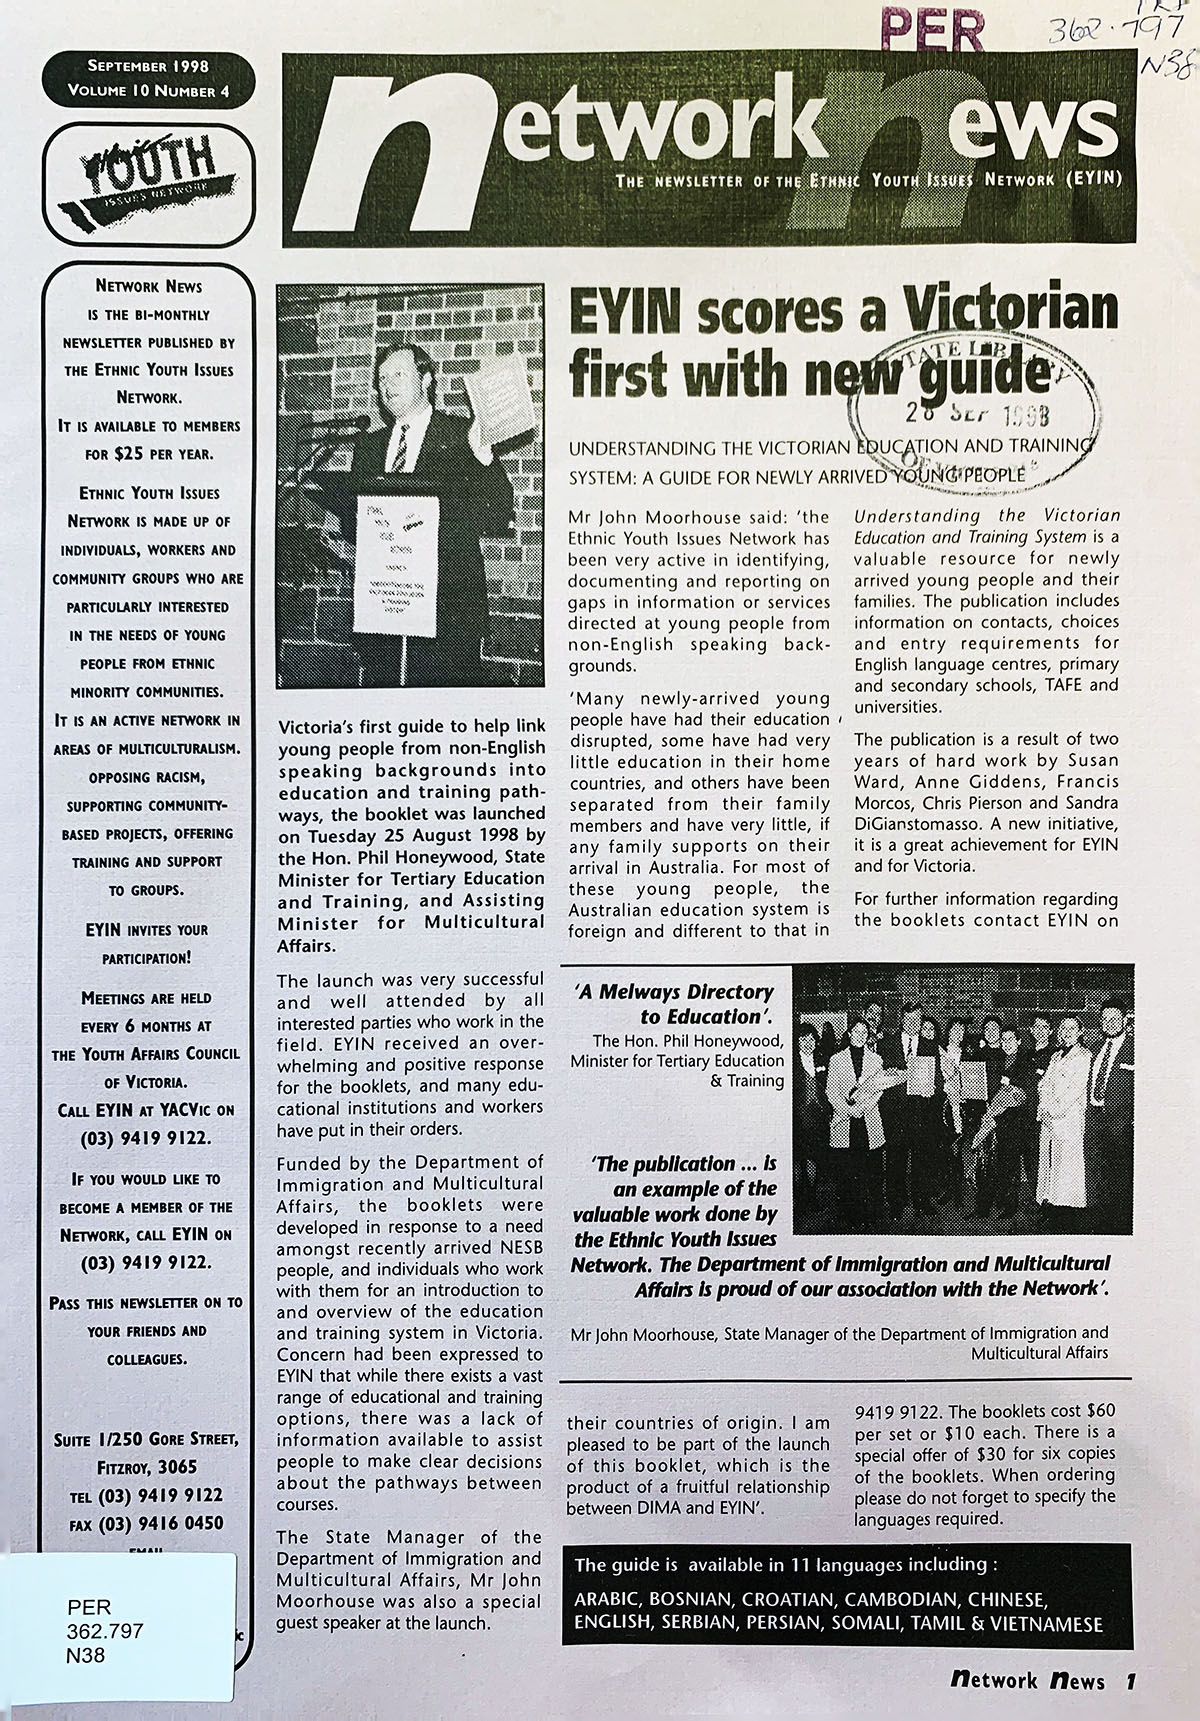 EYIN scores a Victorian first with new guide